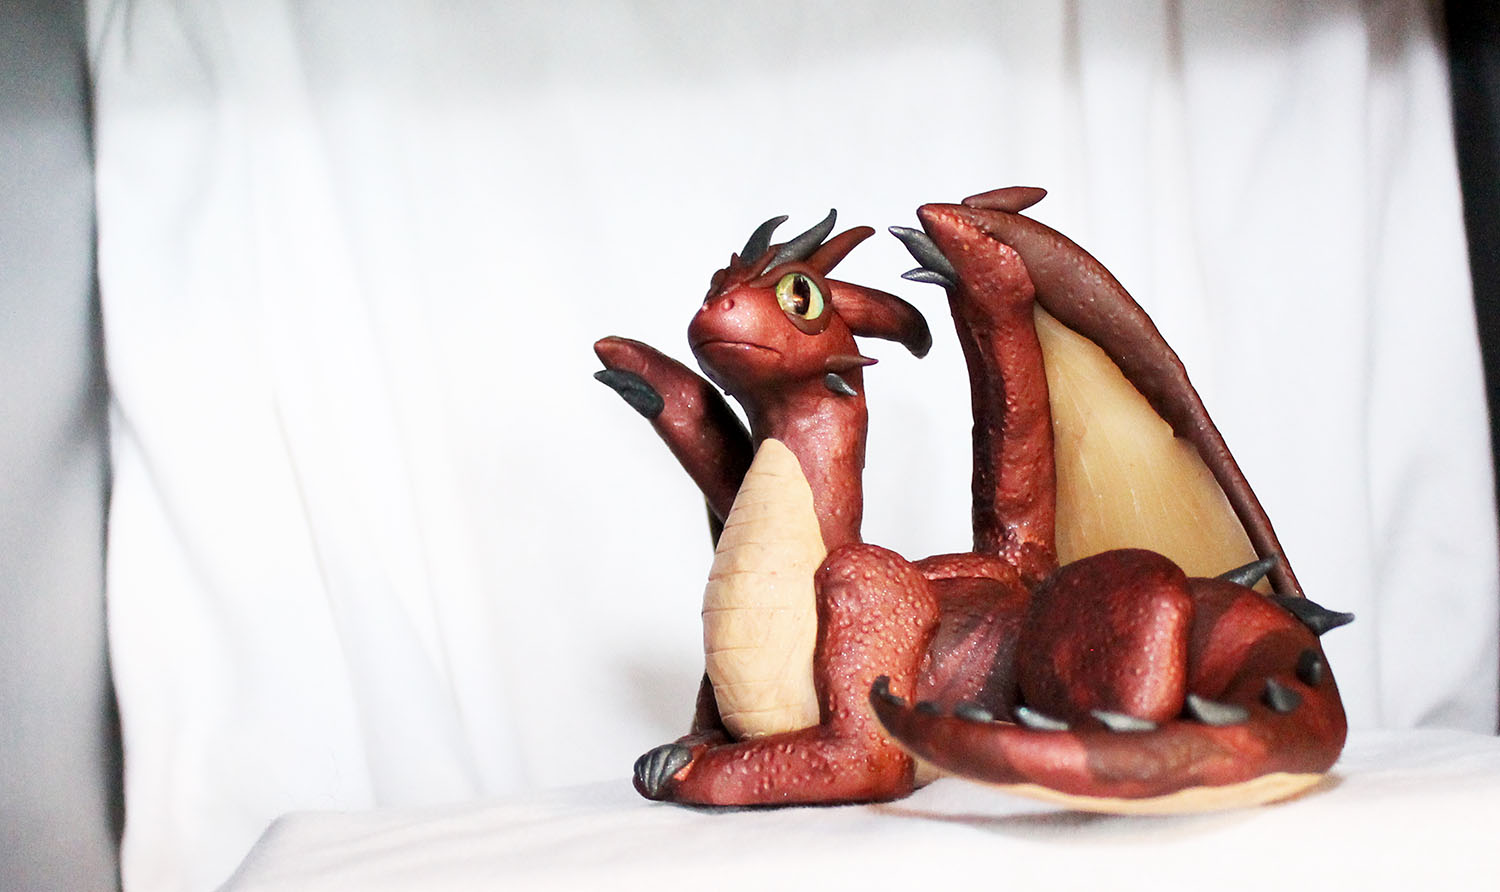 Game of Thrones inspired clay dragon